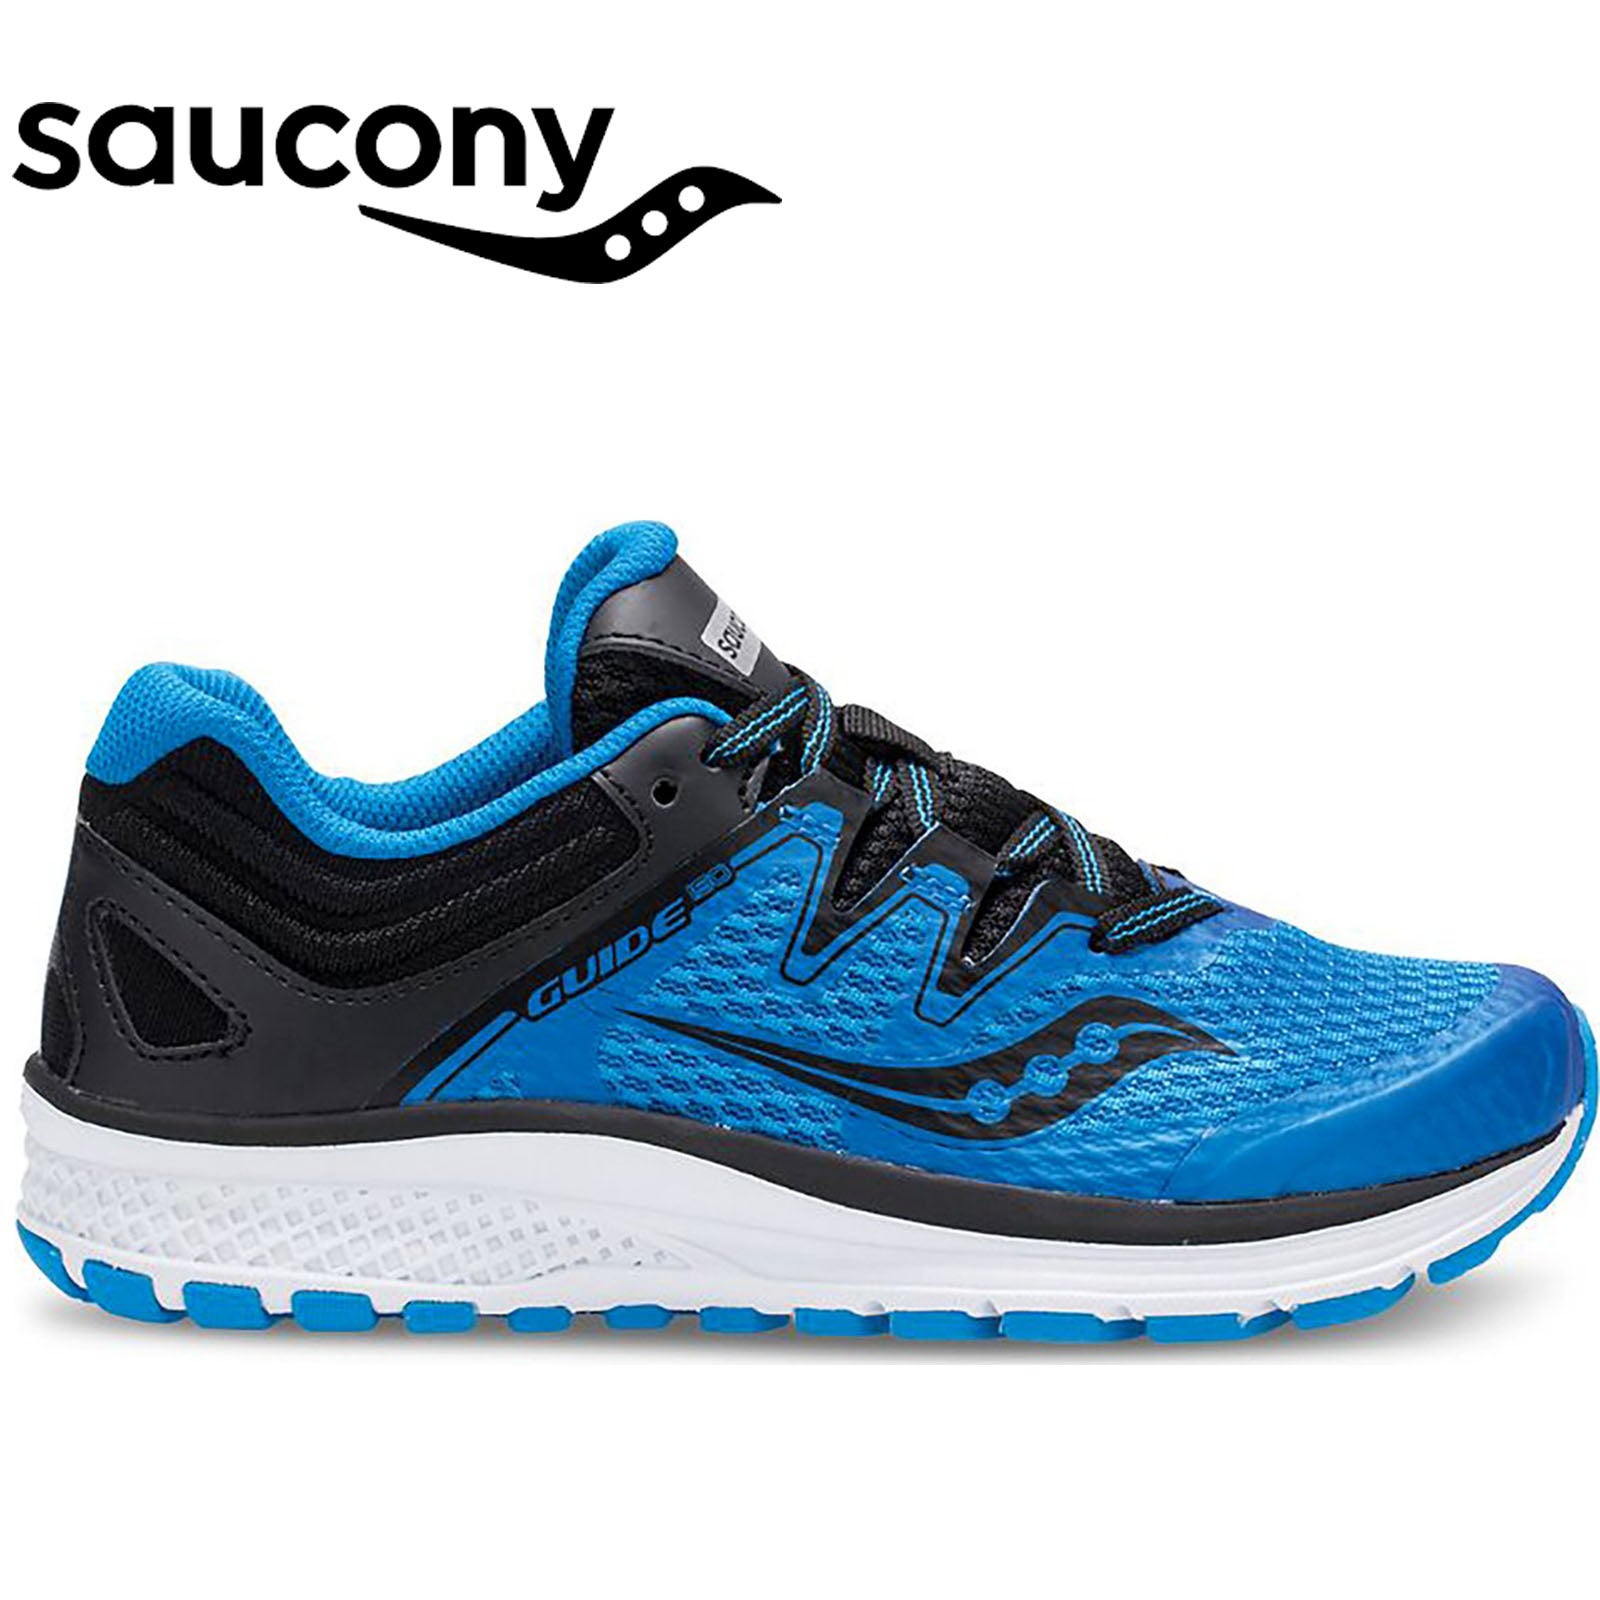 saucony youth shoes